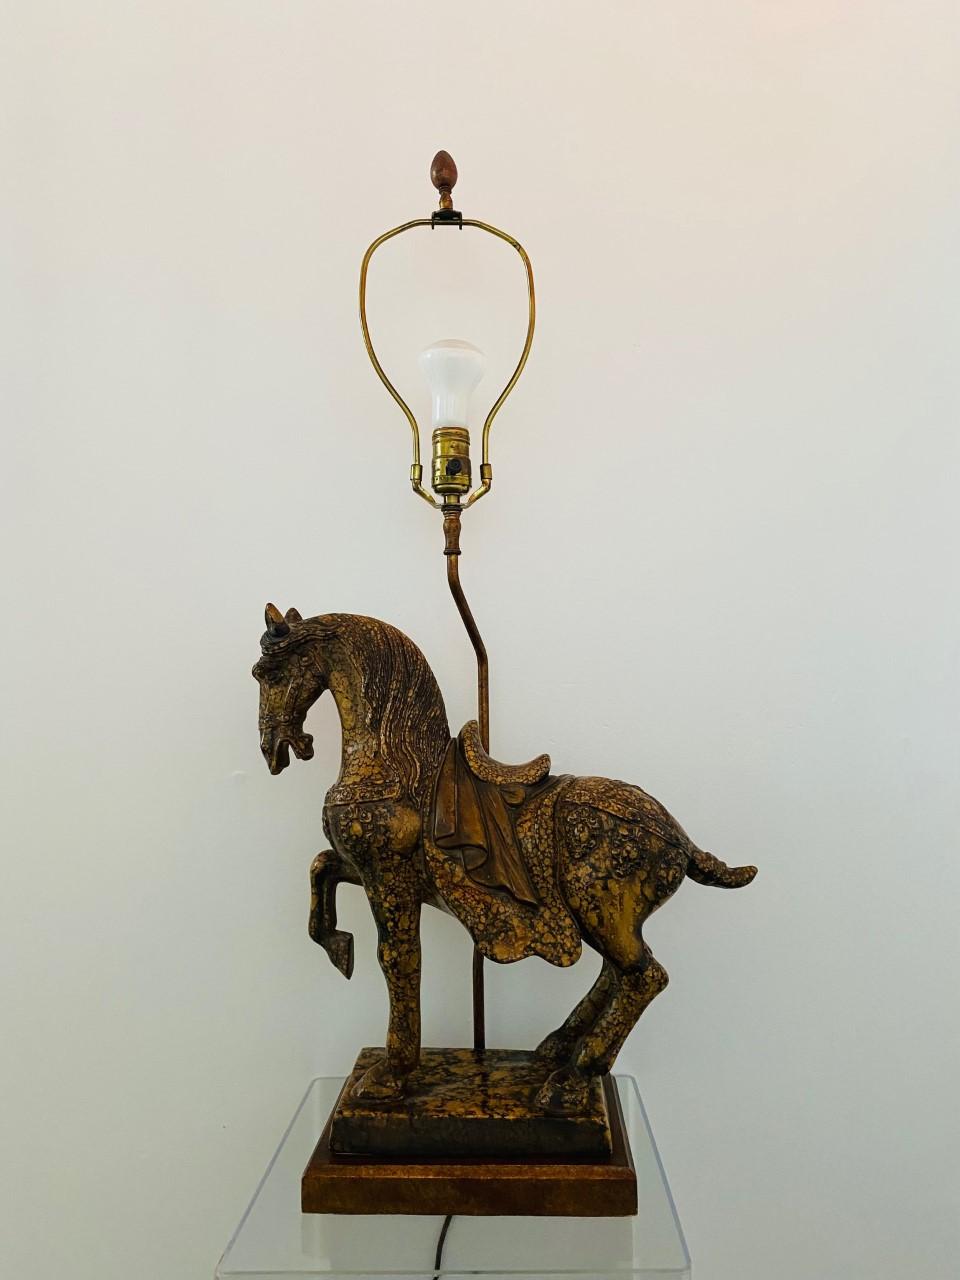 Original Mid-Century Modern plaster Tang dynasty style horse, with a brass rod supporting a vintage custom square shade. The beautiful finish (faux marble) makes this piece sculptural and powerful. Very Hollywood Regency. This incredible piece is by